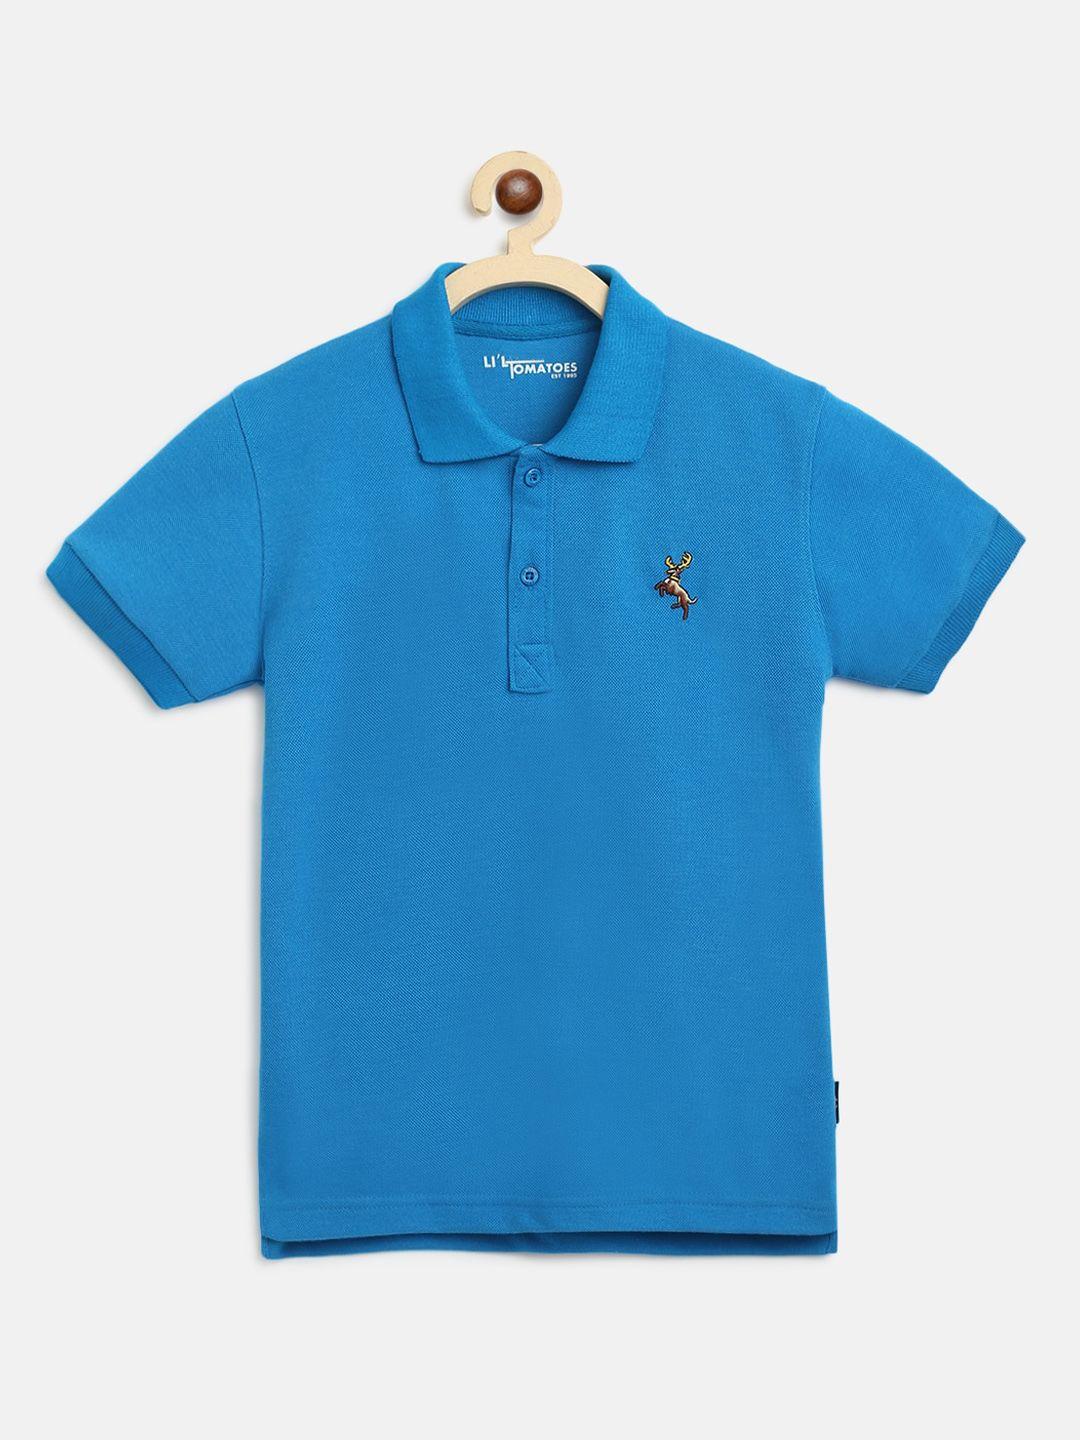 lil tomatoes boys turquoise blue solid polo collar t-shirt